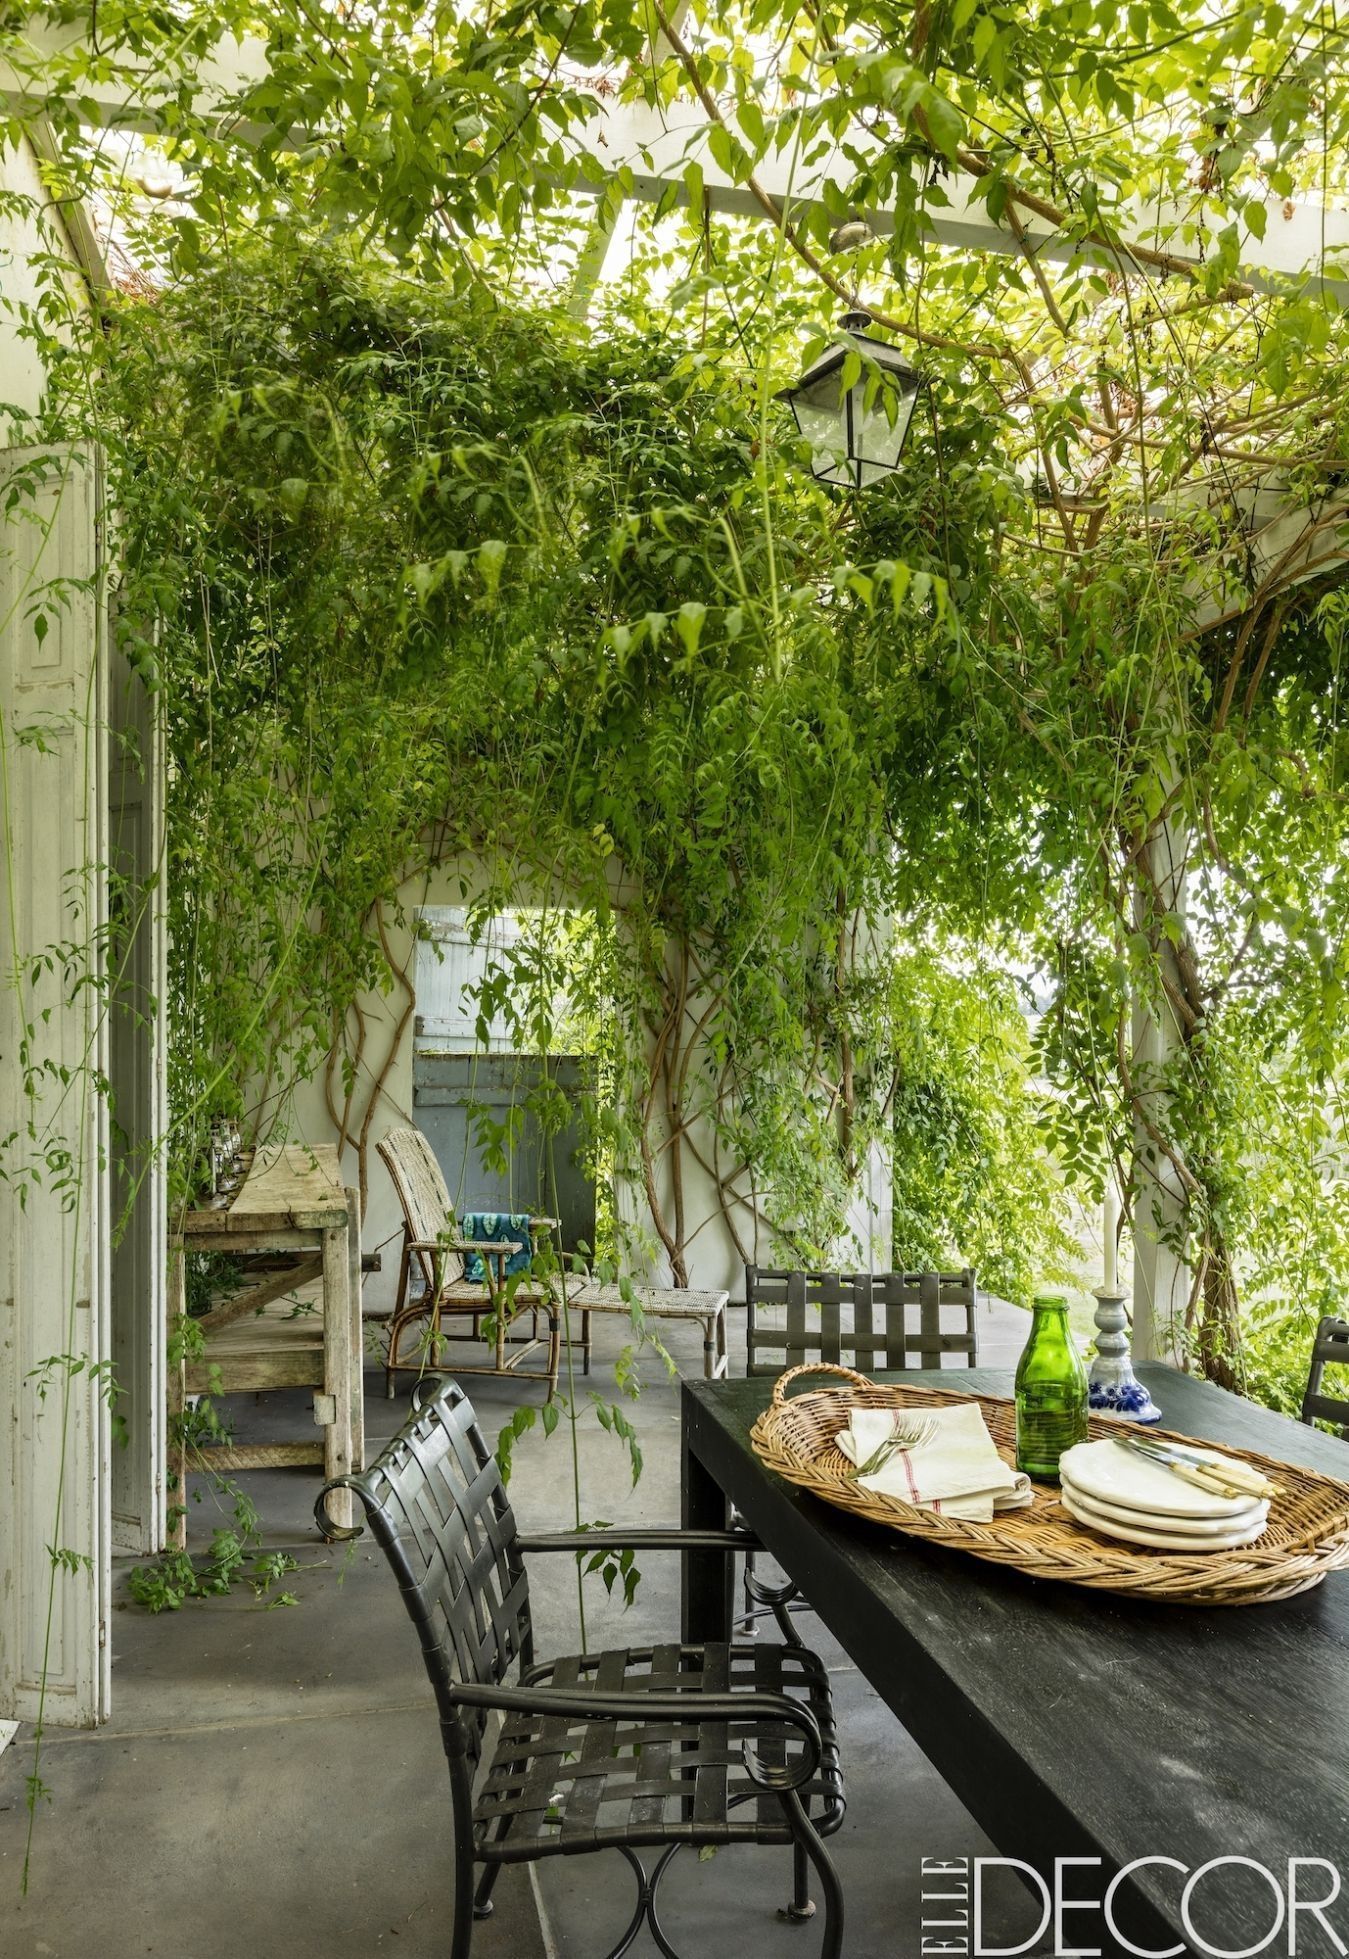 These Rustic Dining Rooms Are The Definition Of Country Chic -   23 terrace garden rustic
 ideas